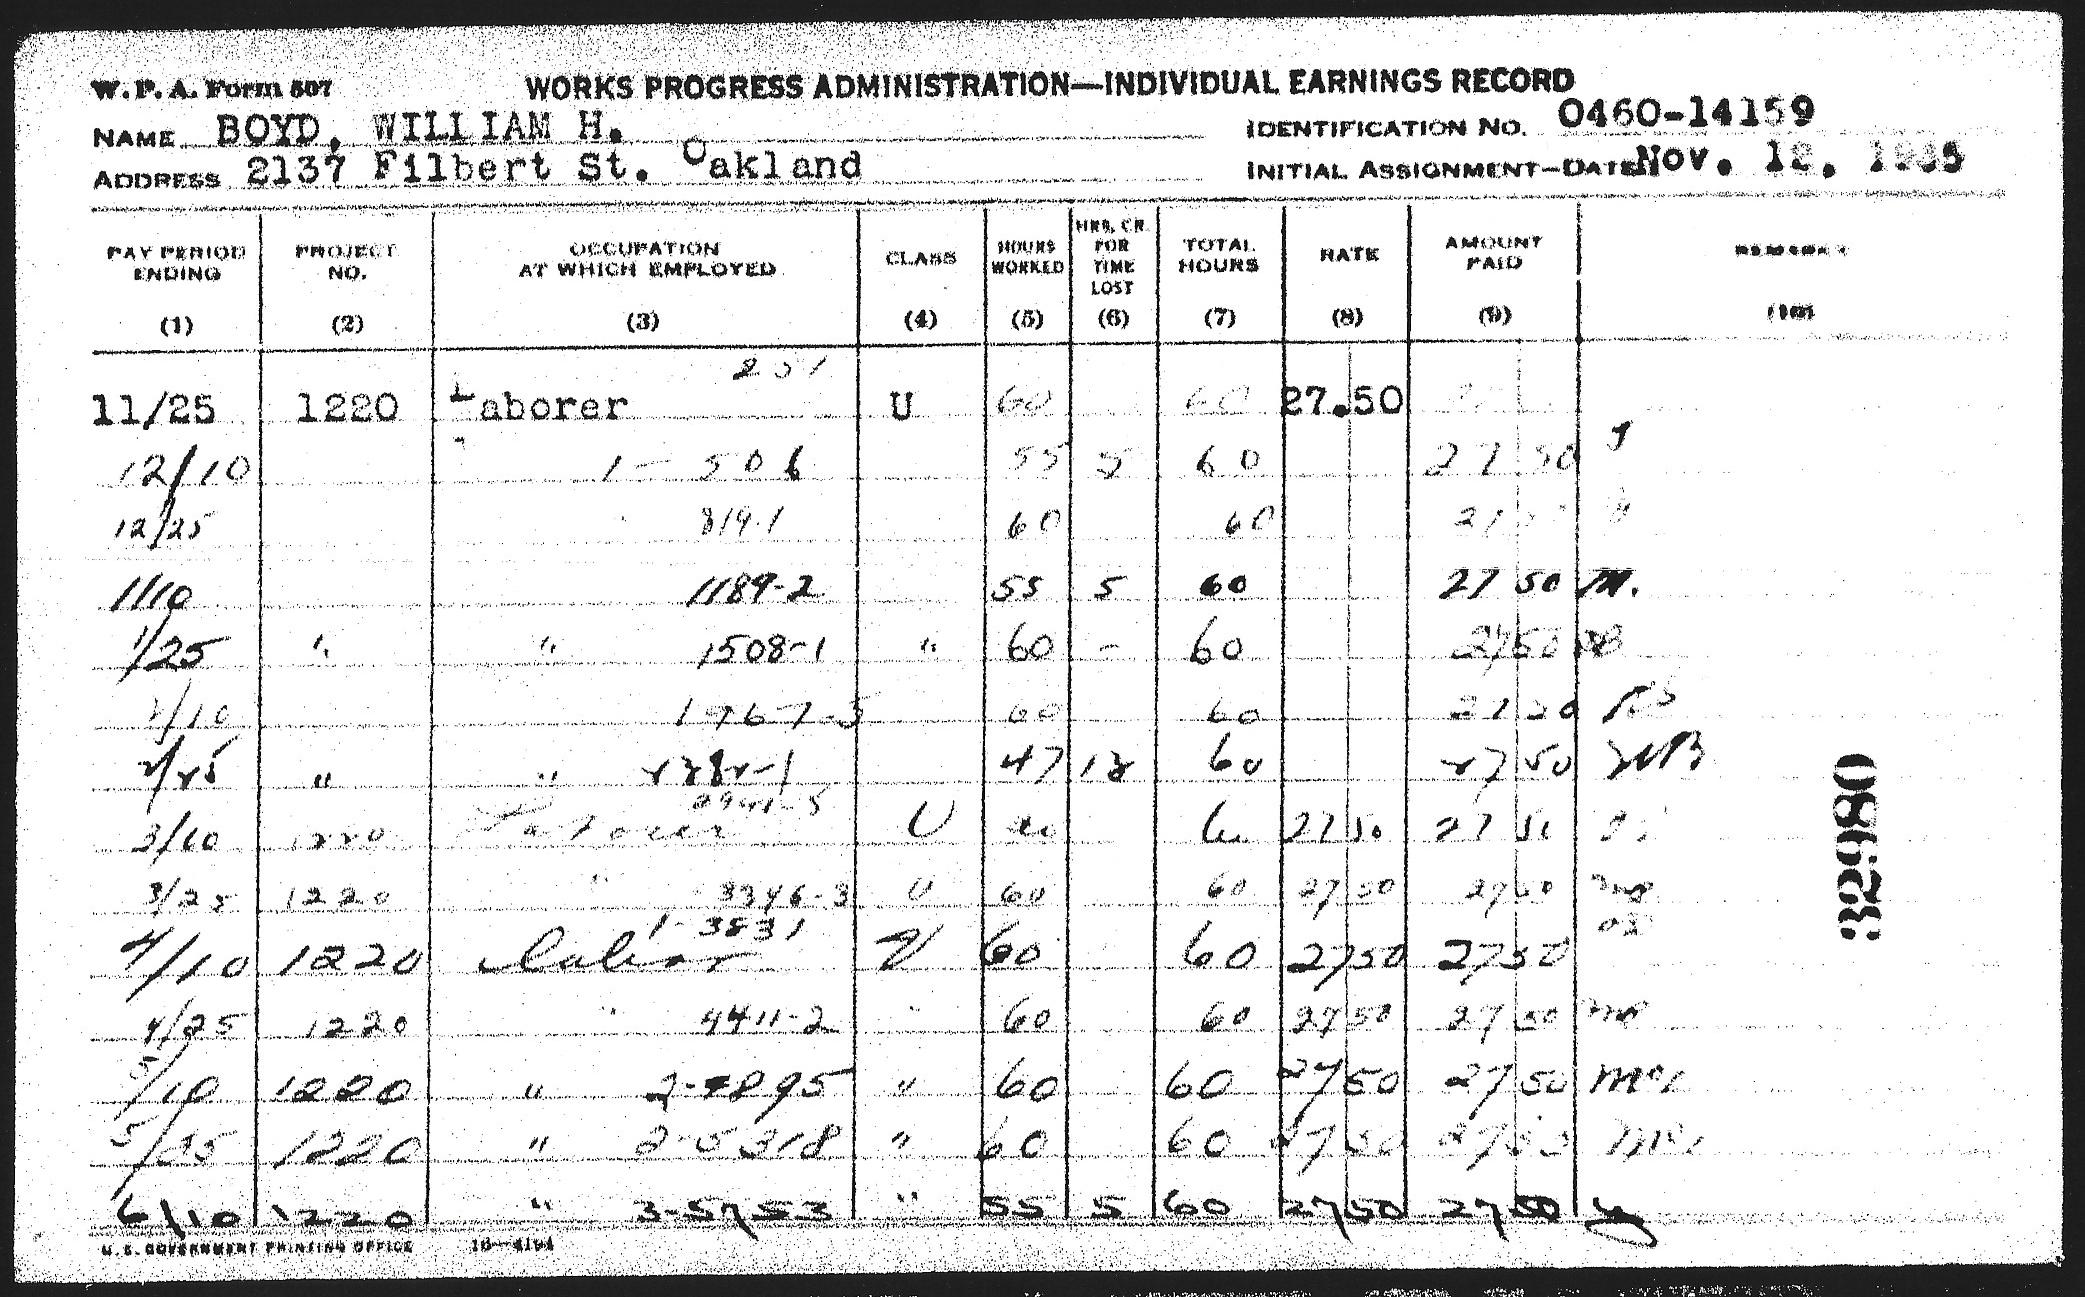 Another individual earnings record for William H. Boyd